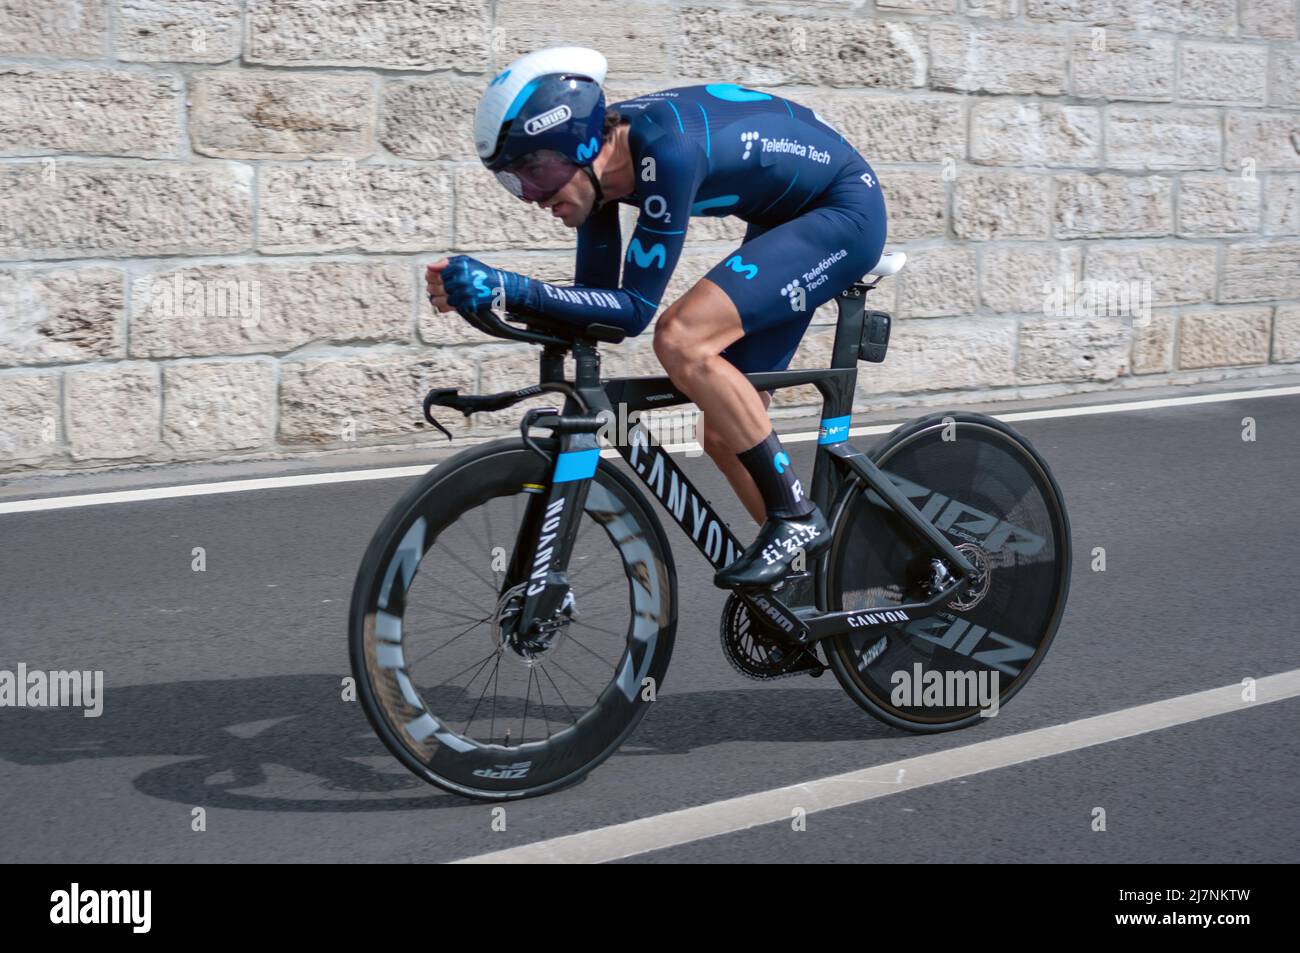 BUDAPEST, HUNGARY - MAY 07, 2022: Pro cyclist Antonio Pedrero MOVISTAR TEAM, Giro D'Italia Stage 2 Time trial - cycling competition on May 07, 2022 in Stock Photo